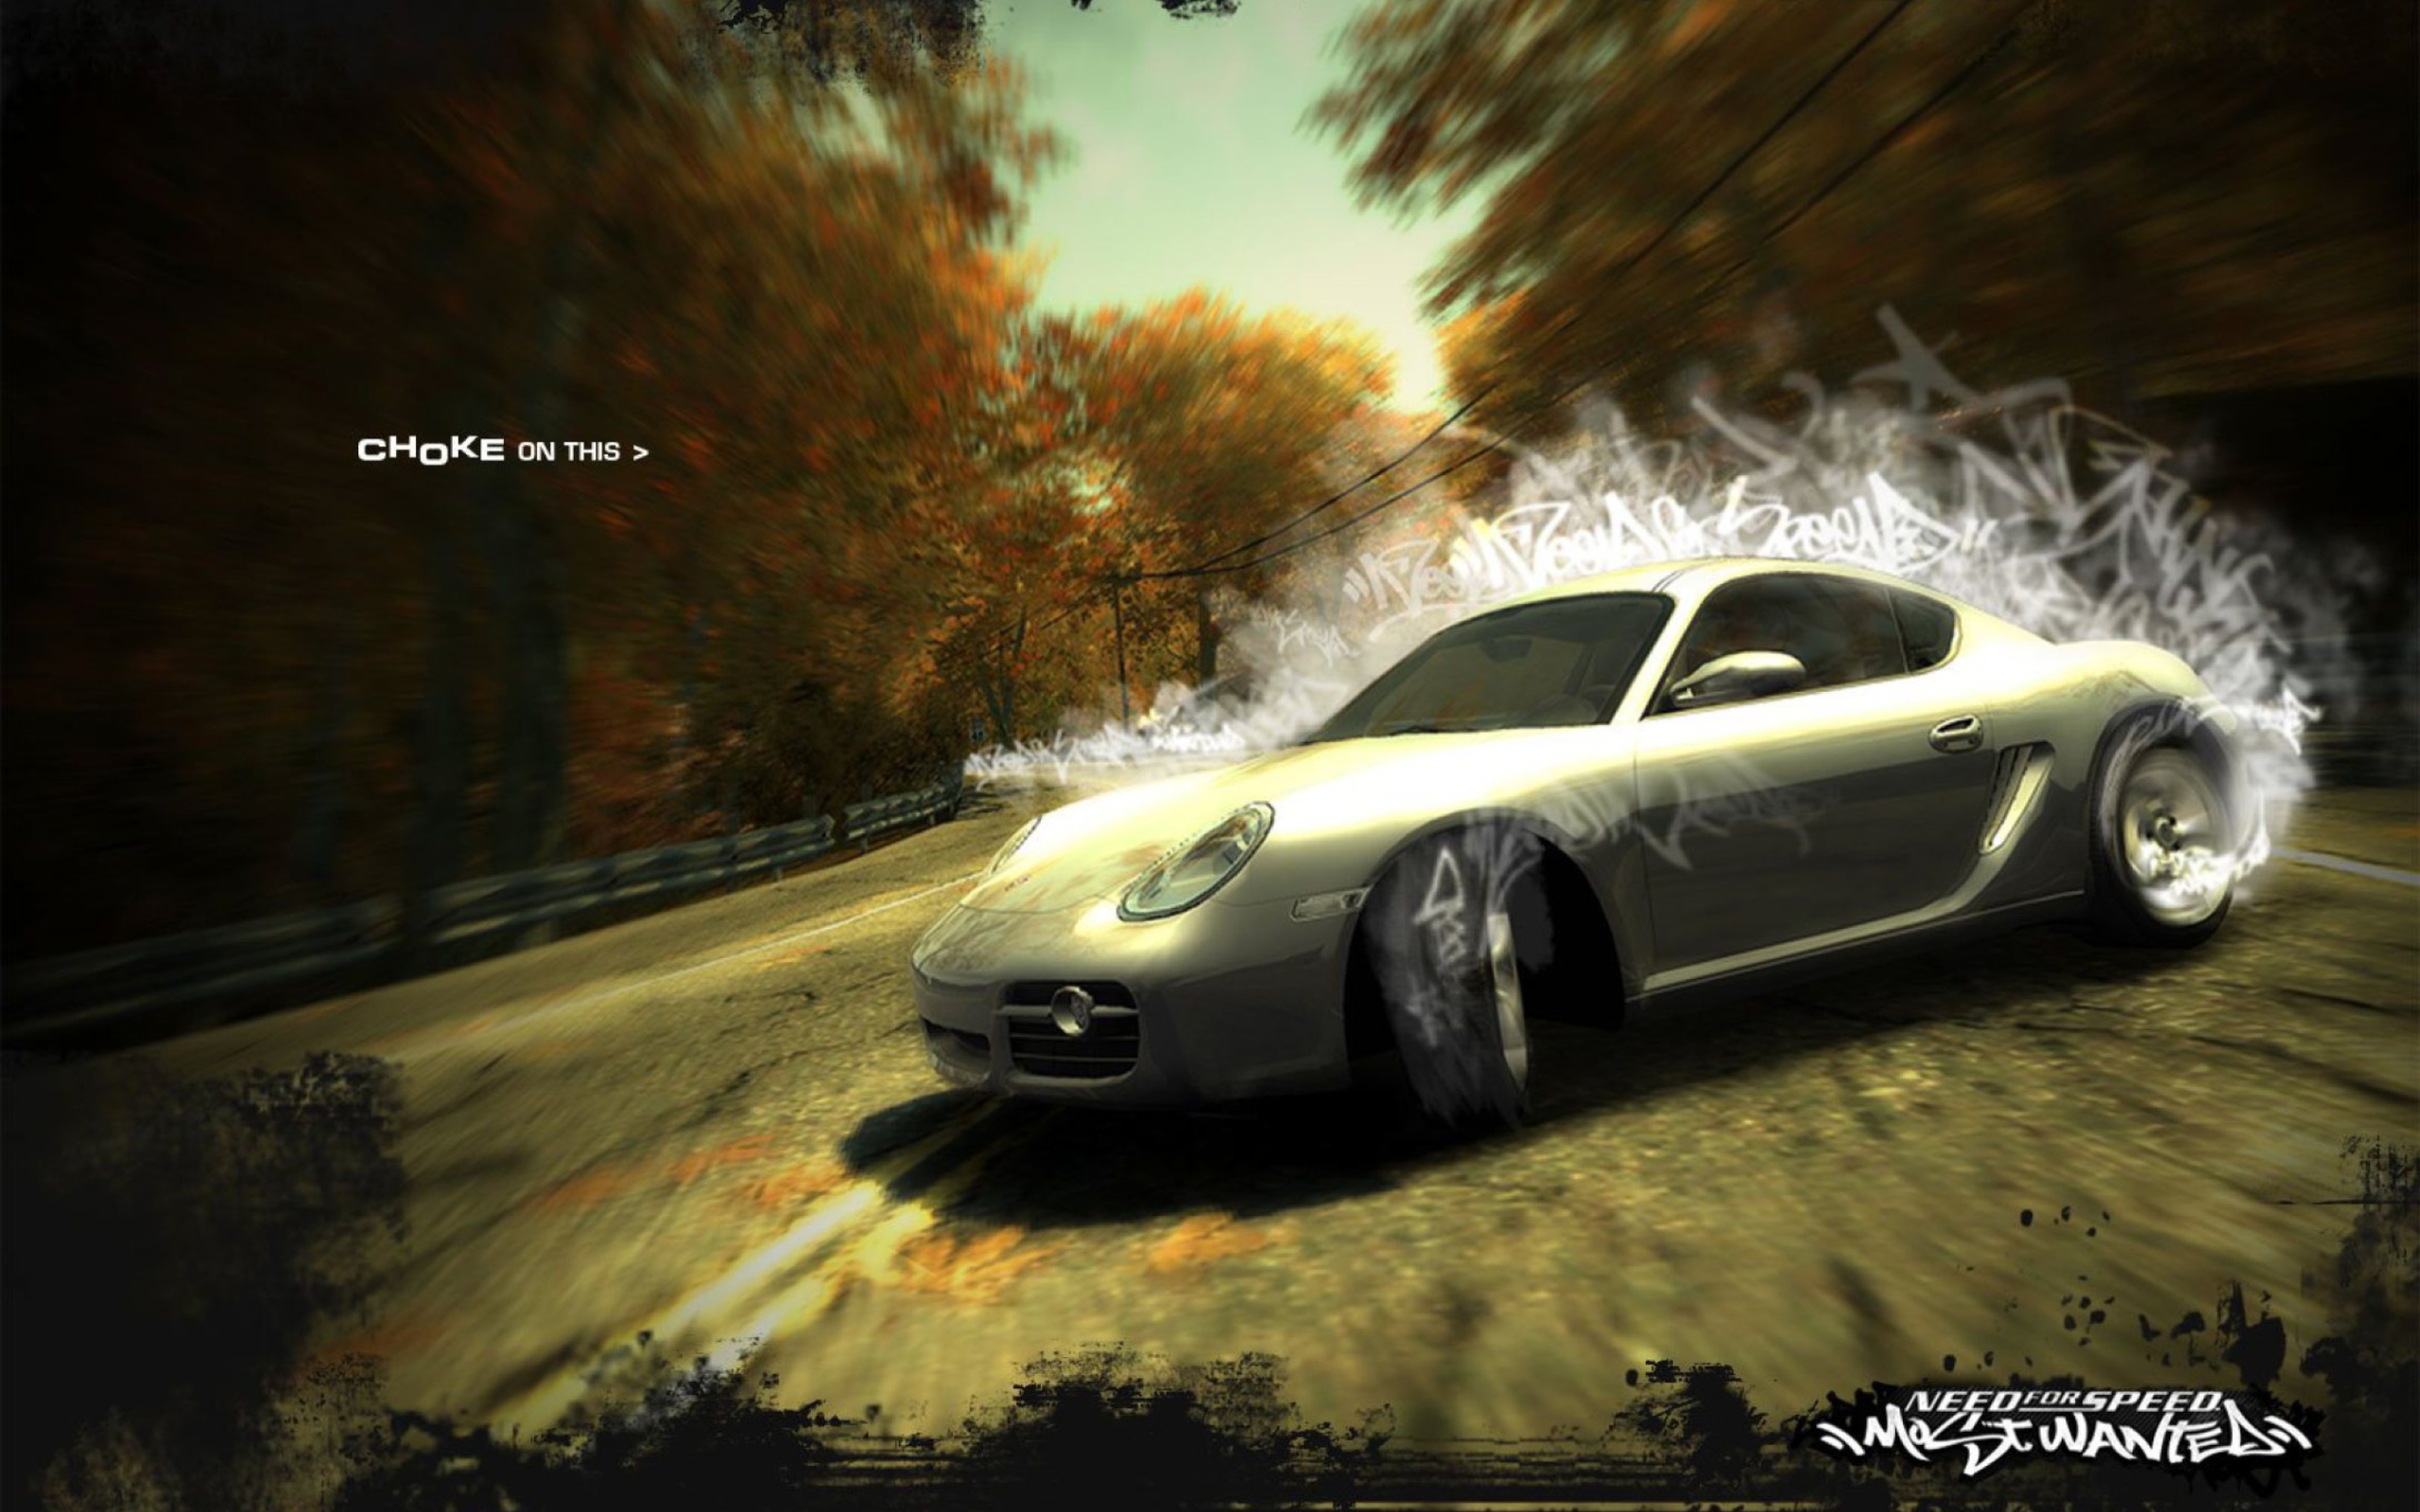 Need For Speed Most Wanted screenshot #1 2560x1600